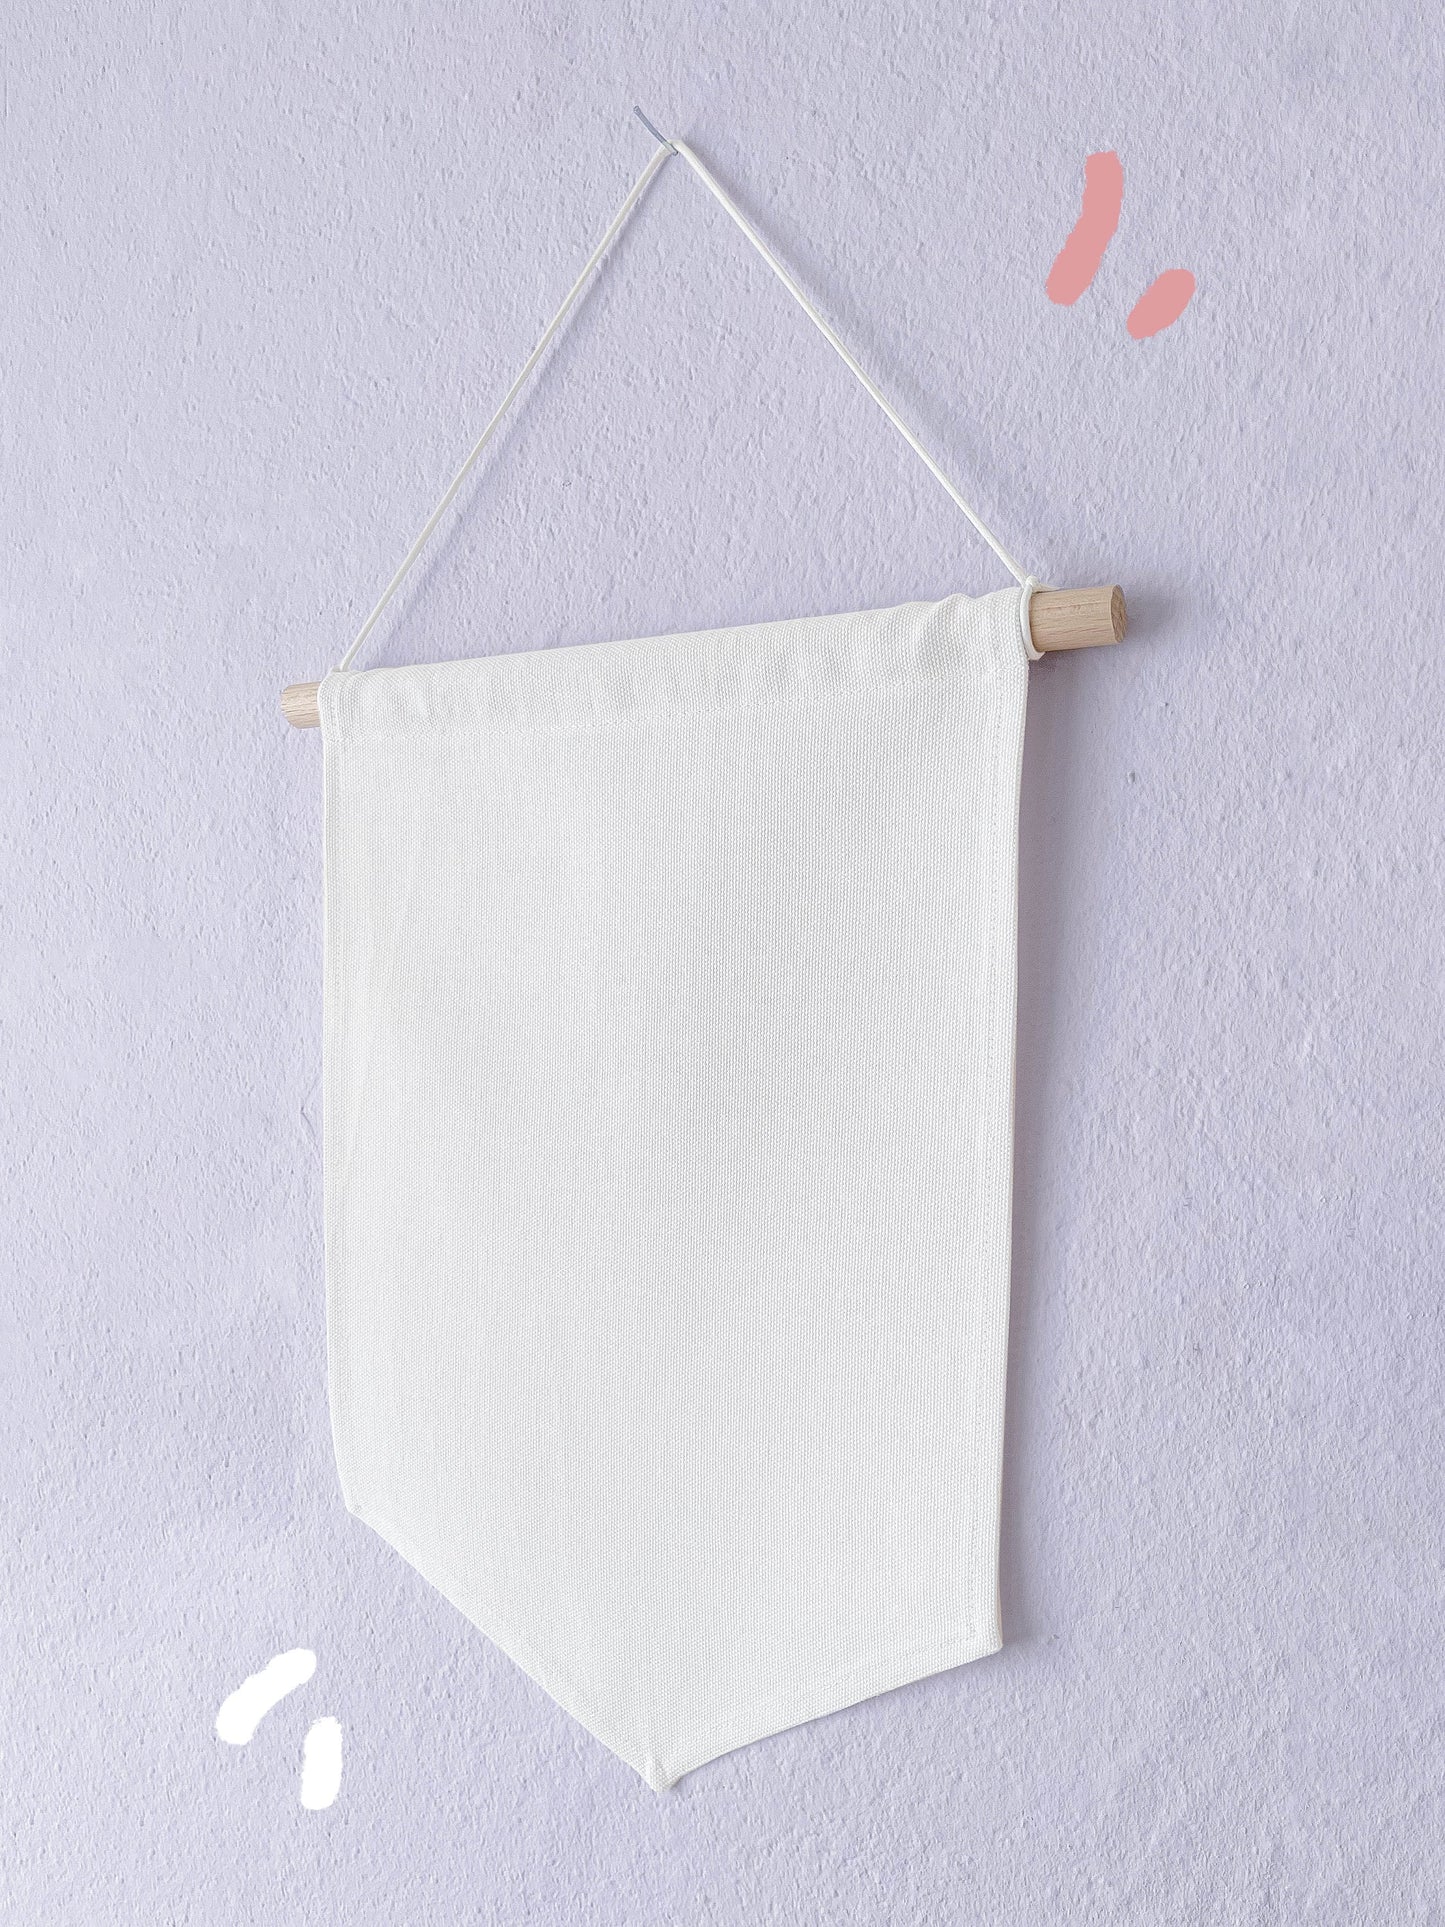 Cute Cotton Pin Banner | L 21cm x 30cm | Handmade in Germany | Off White Canvas Fabric | Classic Pin Display